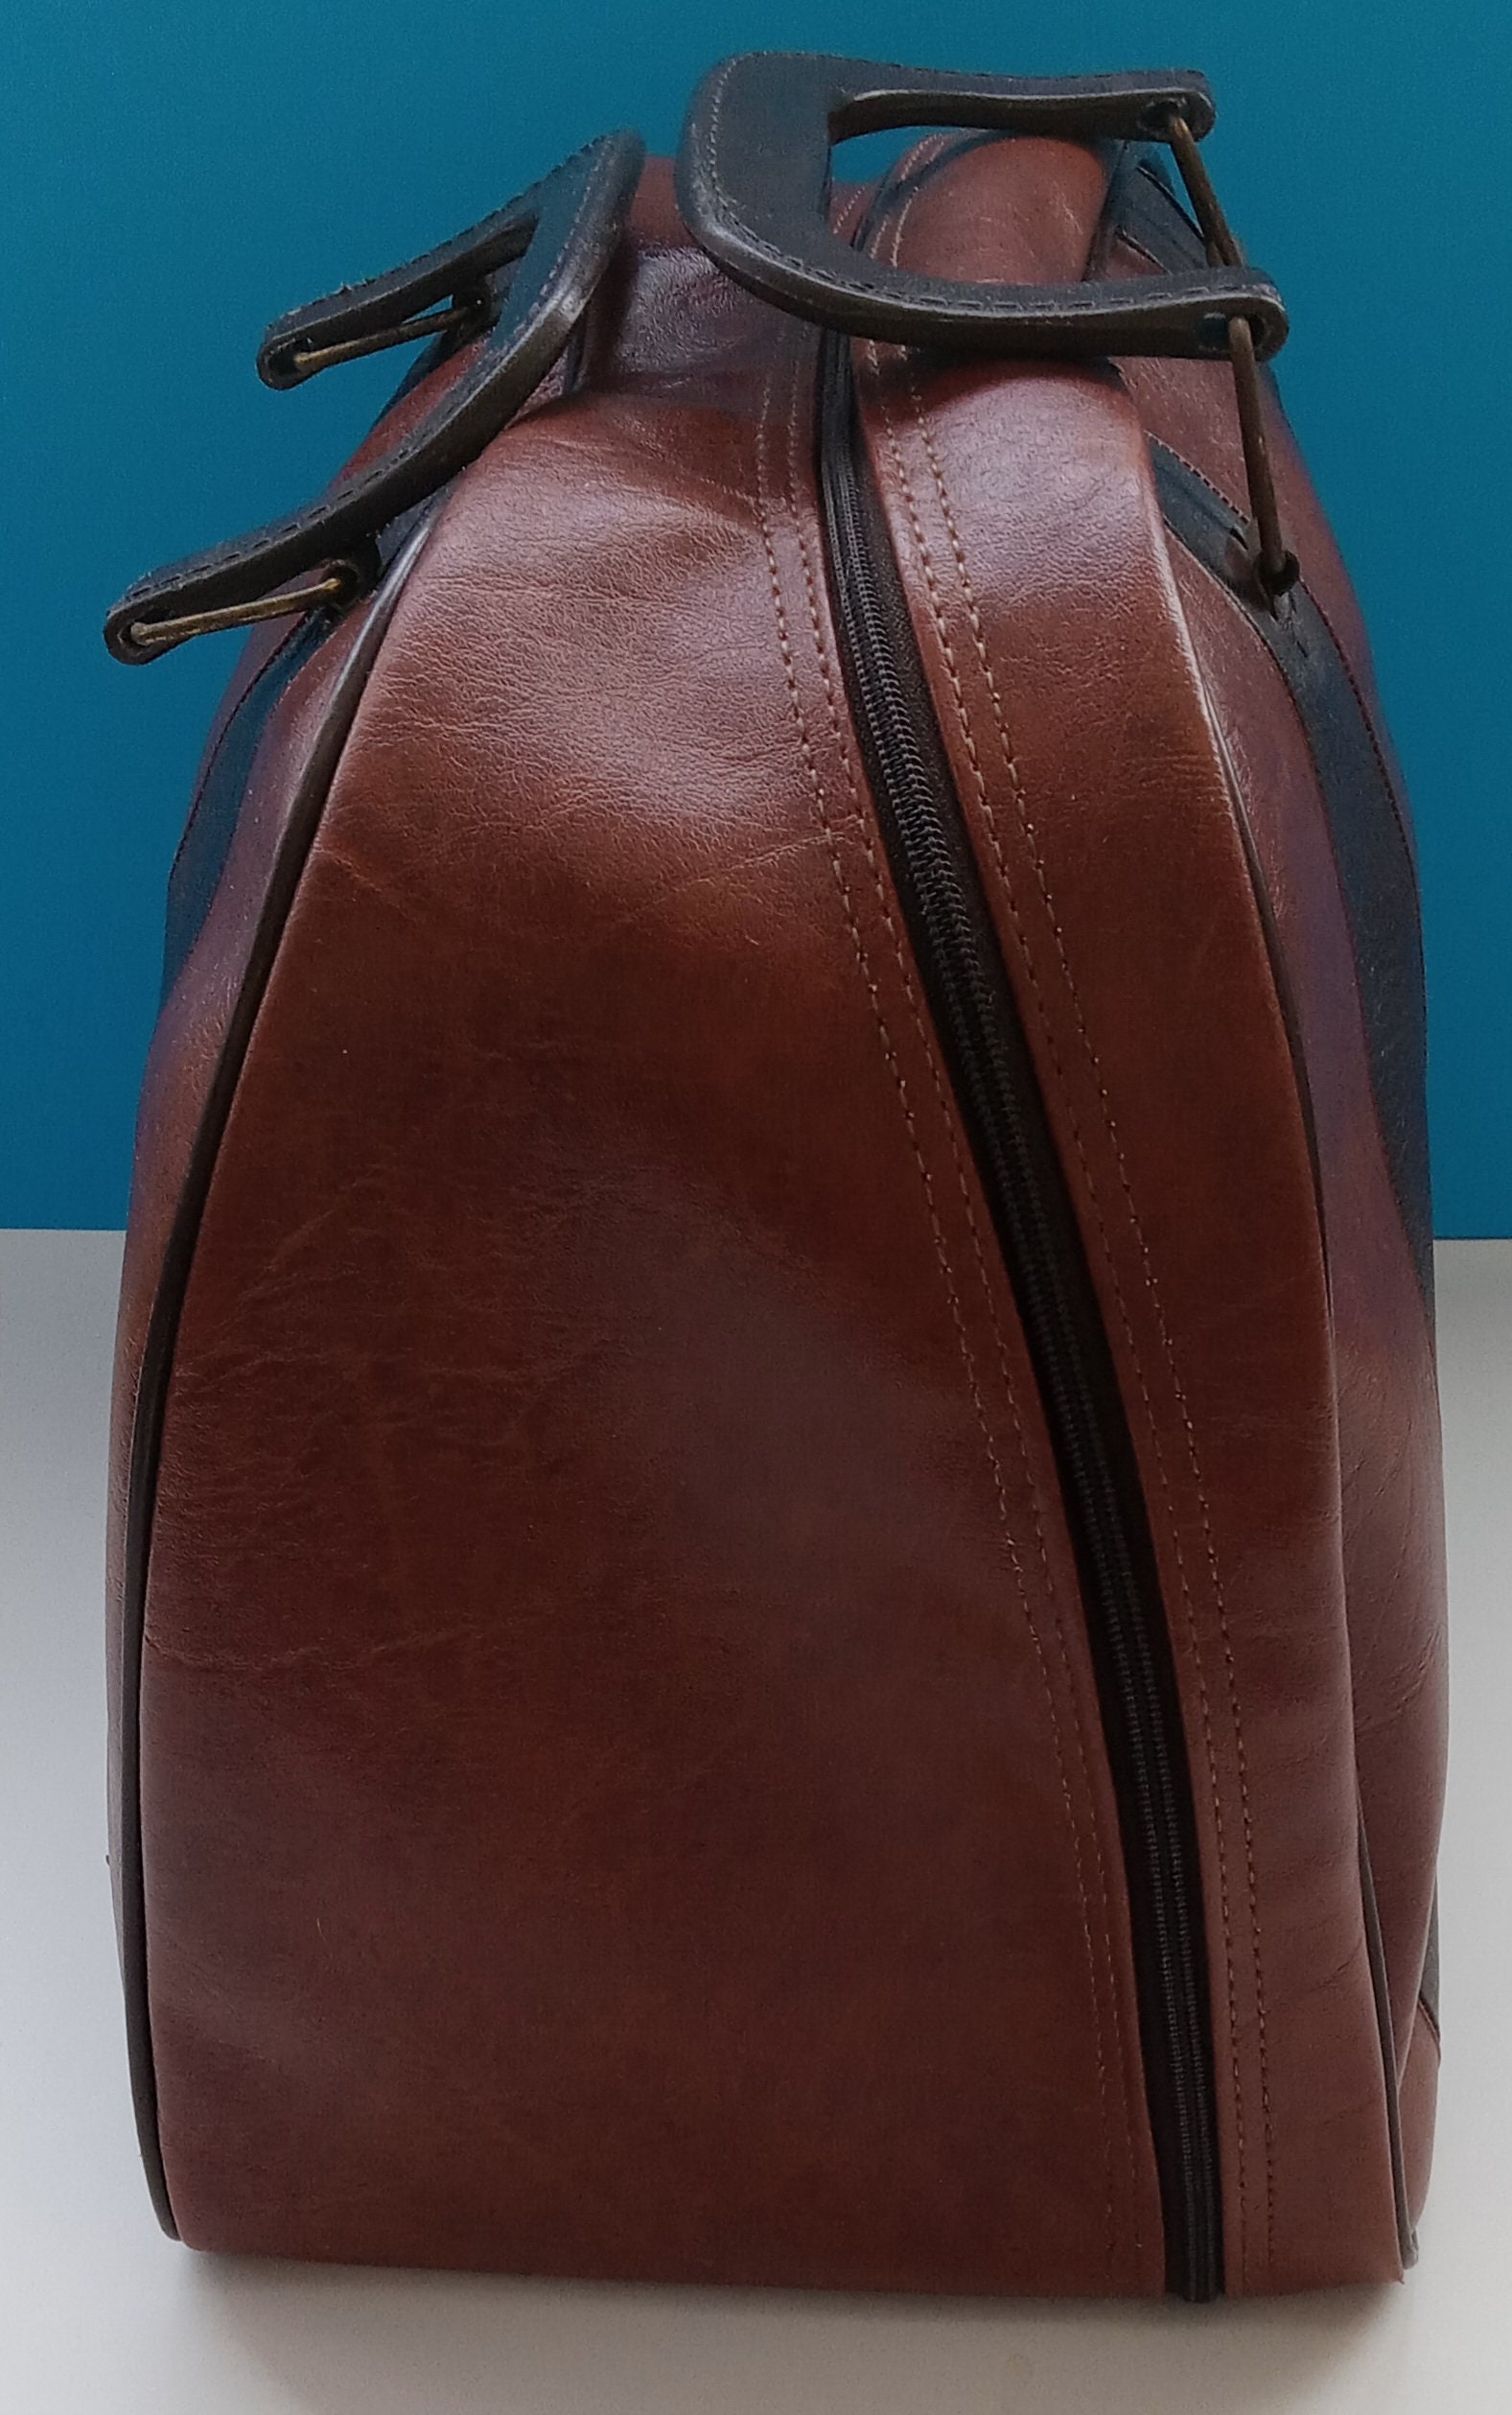 3D Model: Bowling Bag Closed ~ Buy Now #90881007